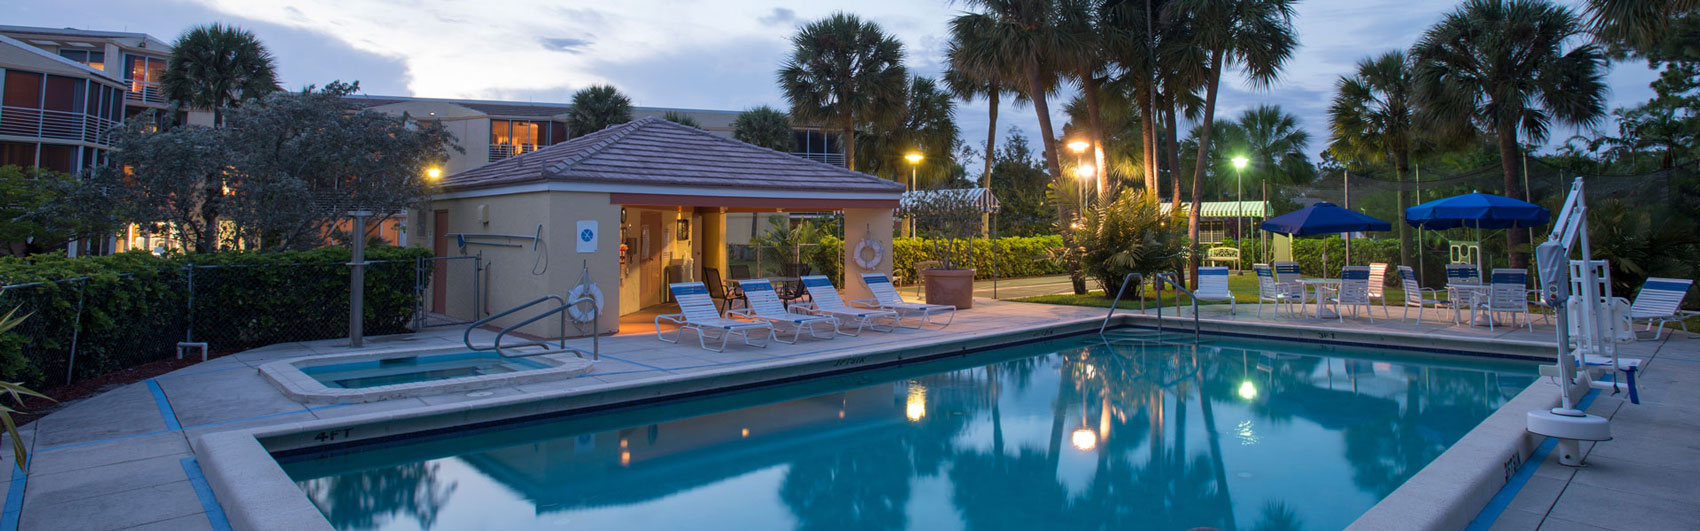 Outdoor pool at Abbey Delray South a senior living community in Delray Beach Florida